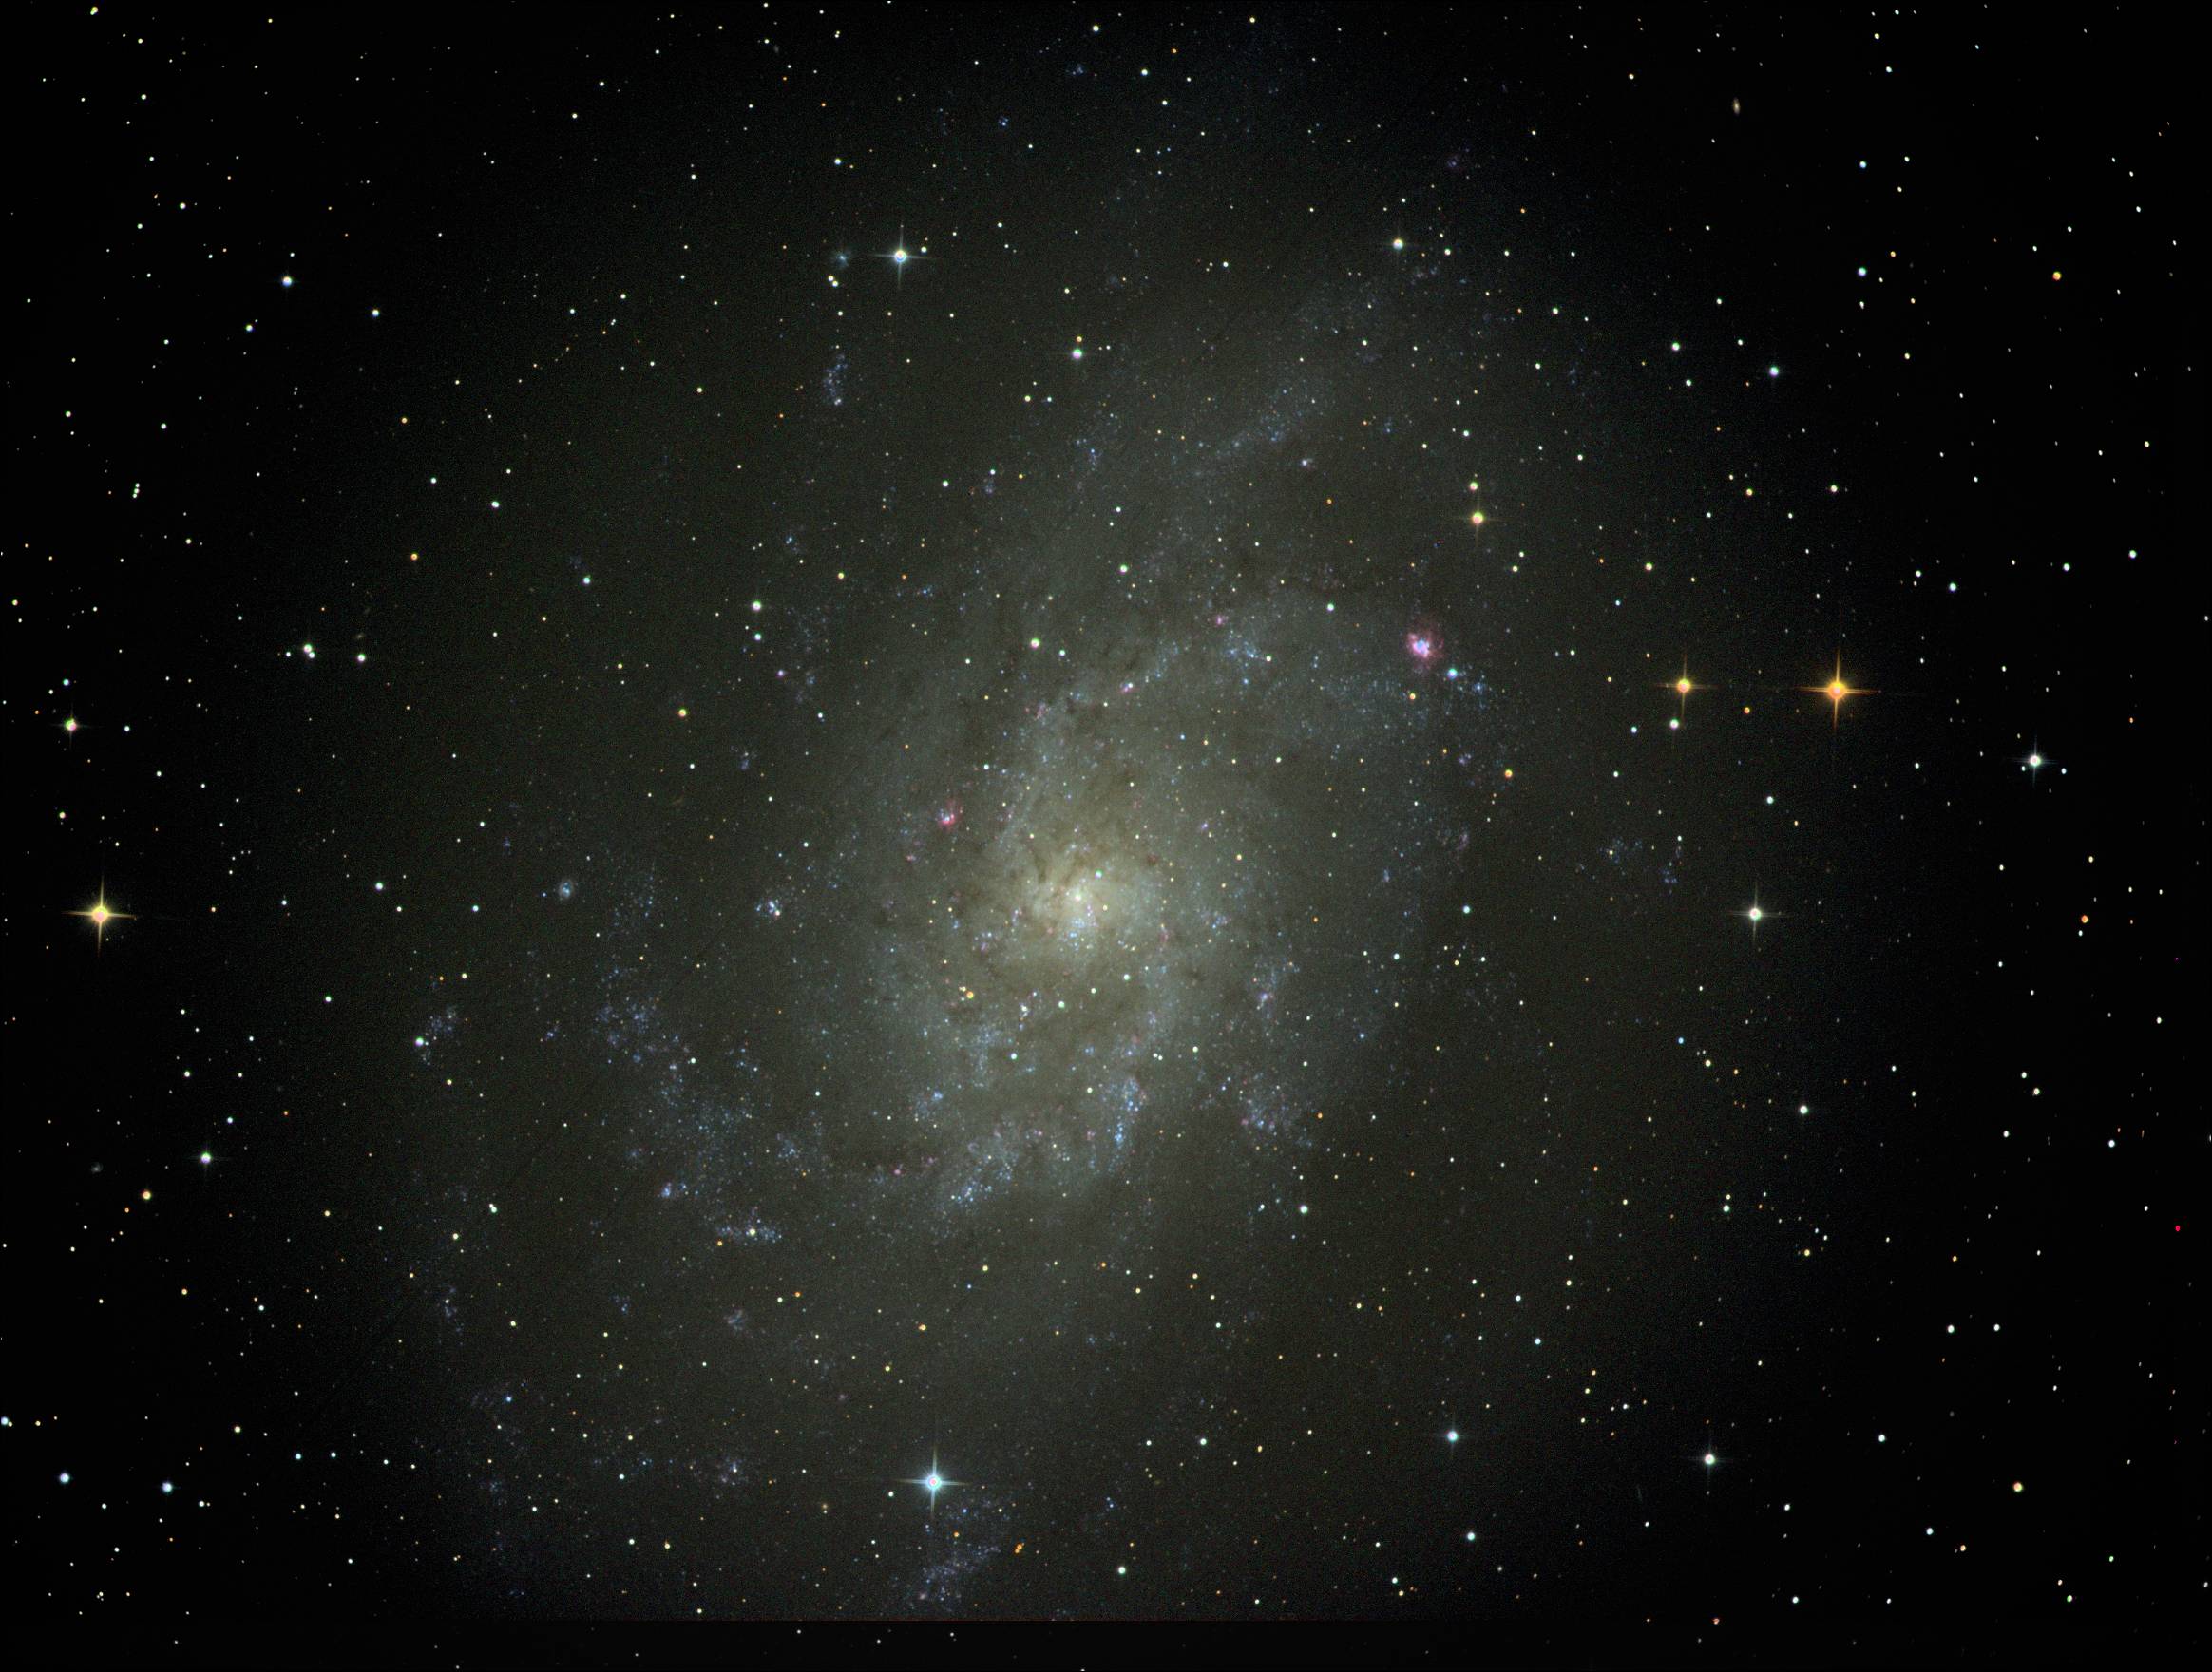 m33LRGBHa_120sec_1x1_L_frame26@  0xFD  0xF  0xD  5x120R  5x120G  5x120B  0x0RGB  23x120L  _stacked.jpg